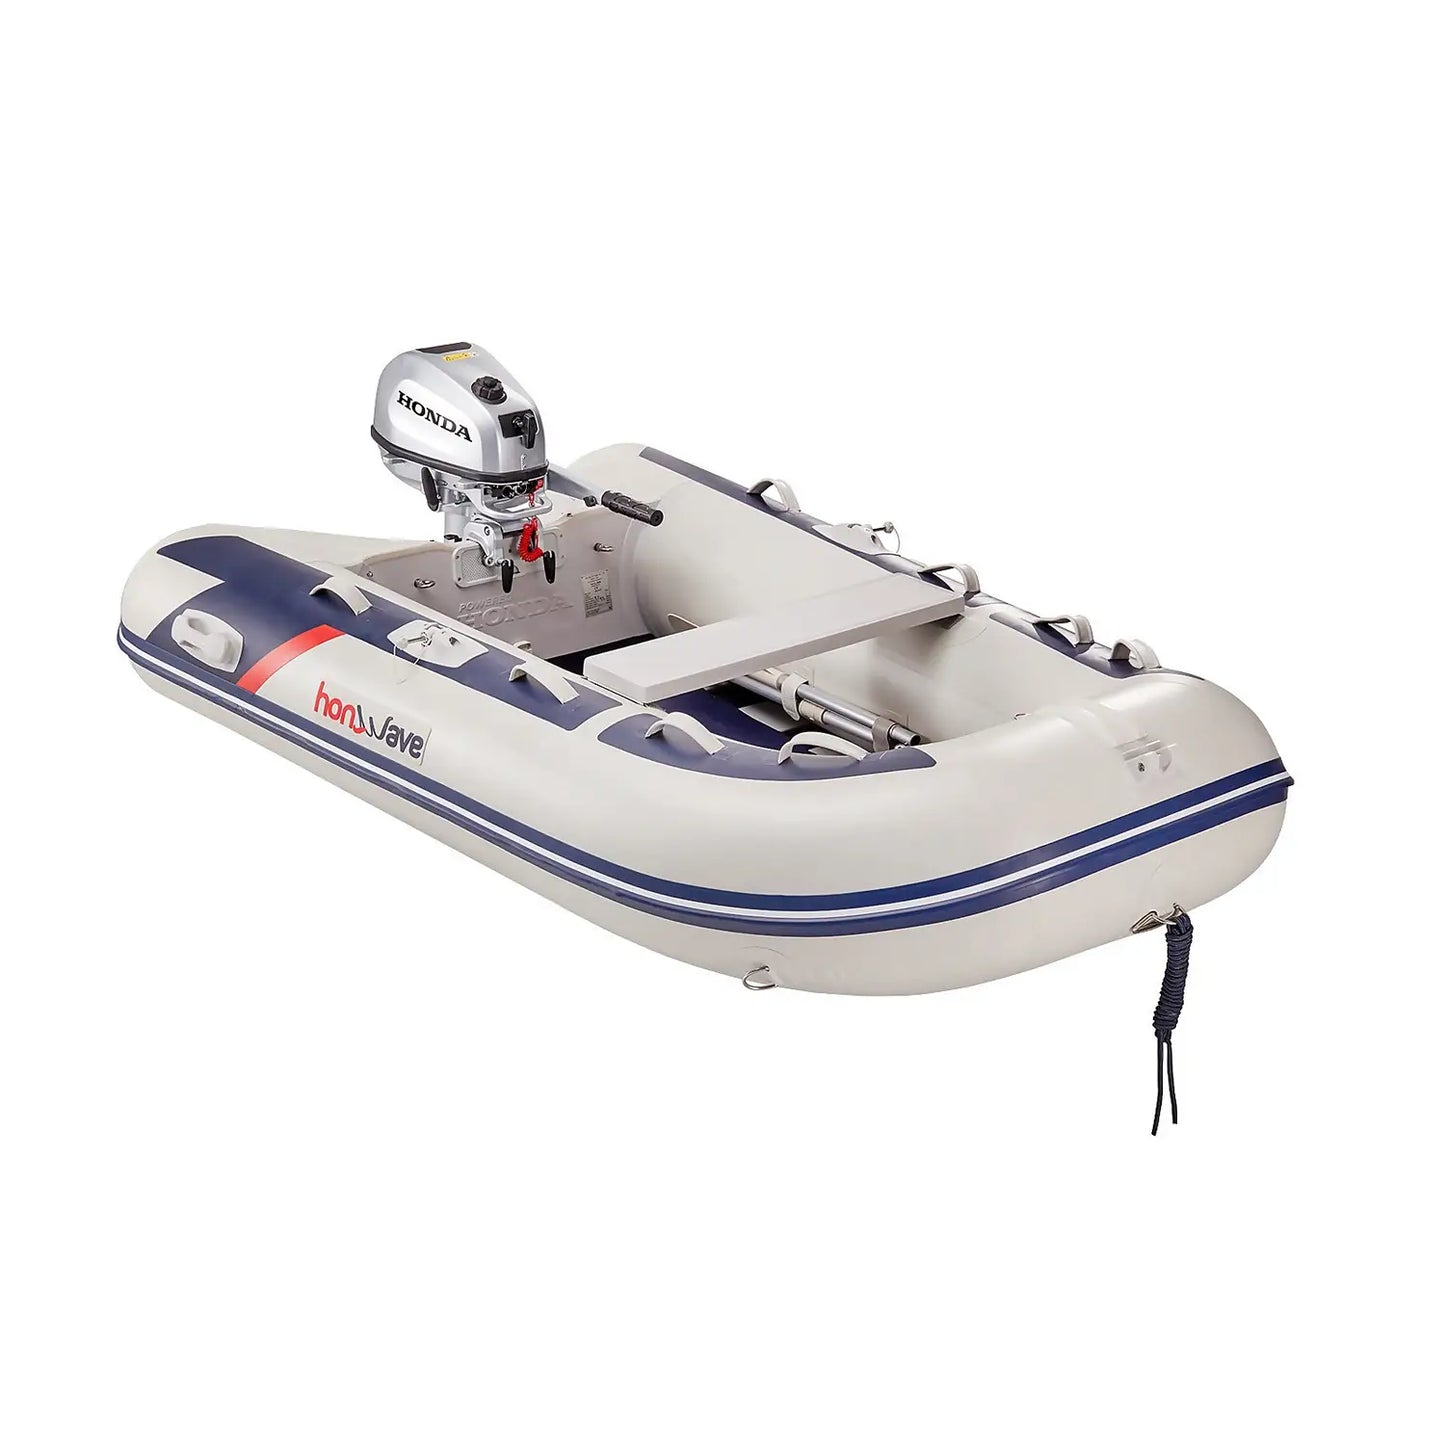 Honwave Package T30AE3 3.0m Inflatable Boat Dinghy Aluminium Floor & Honda Bf10 10hp Outboard Engine